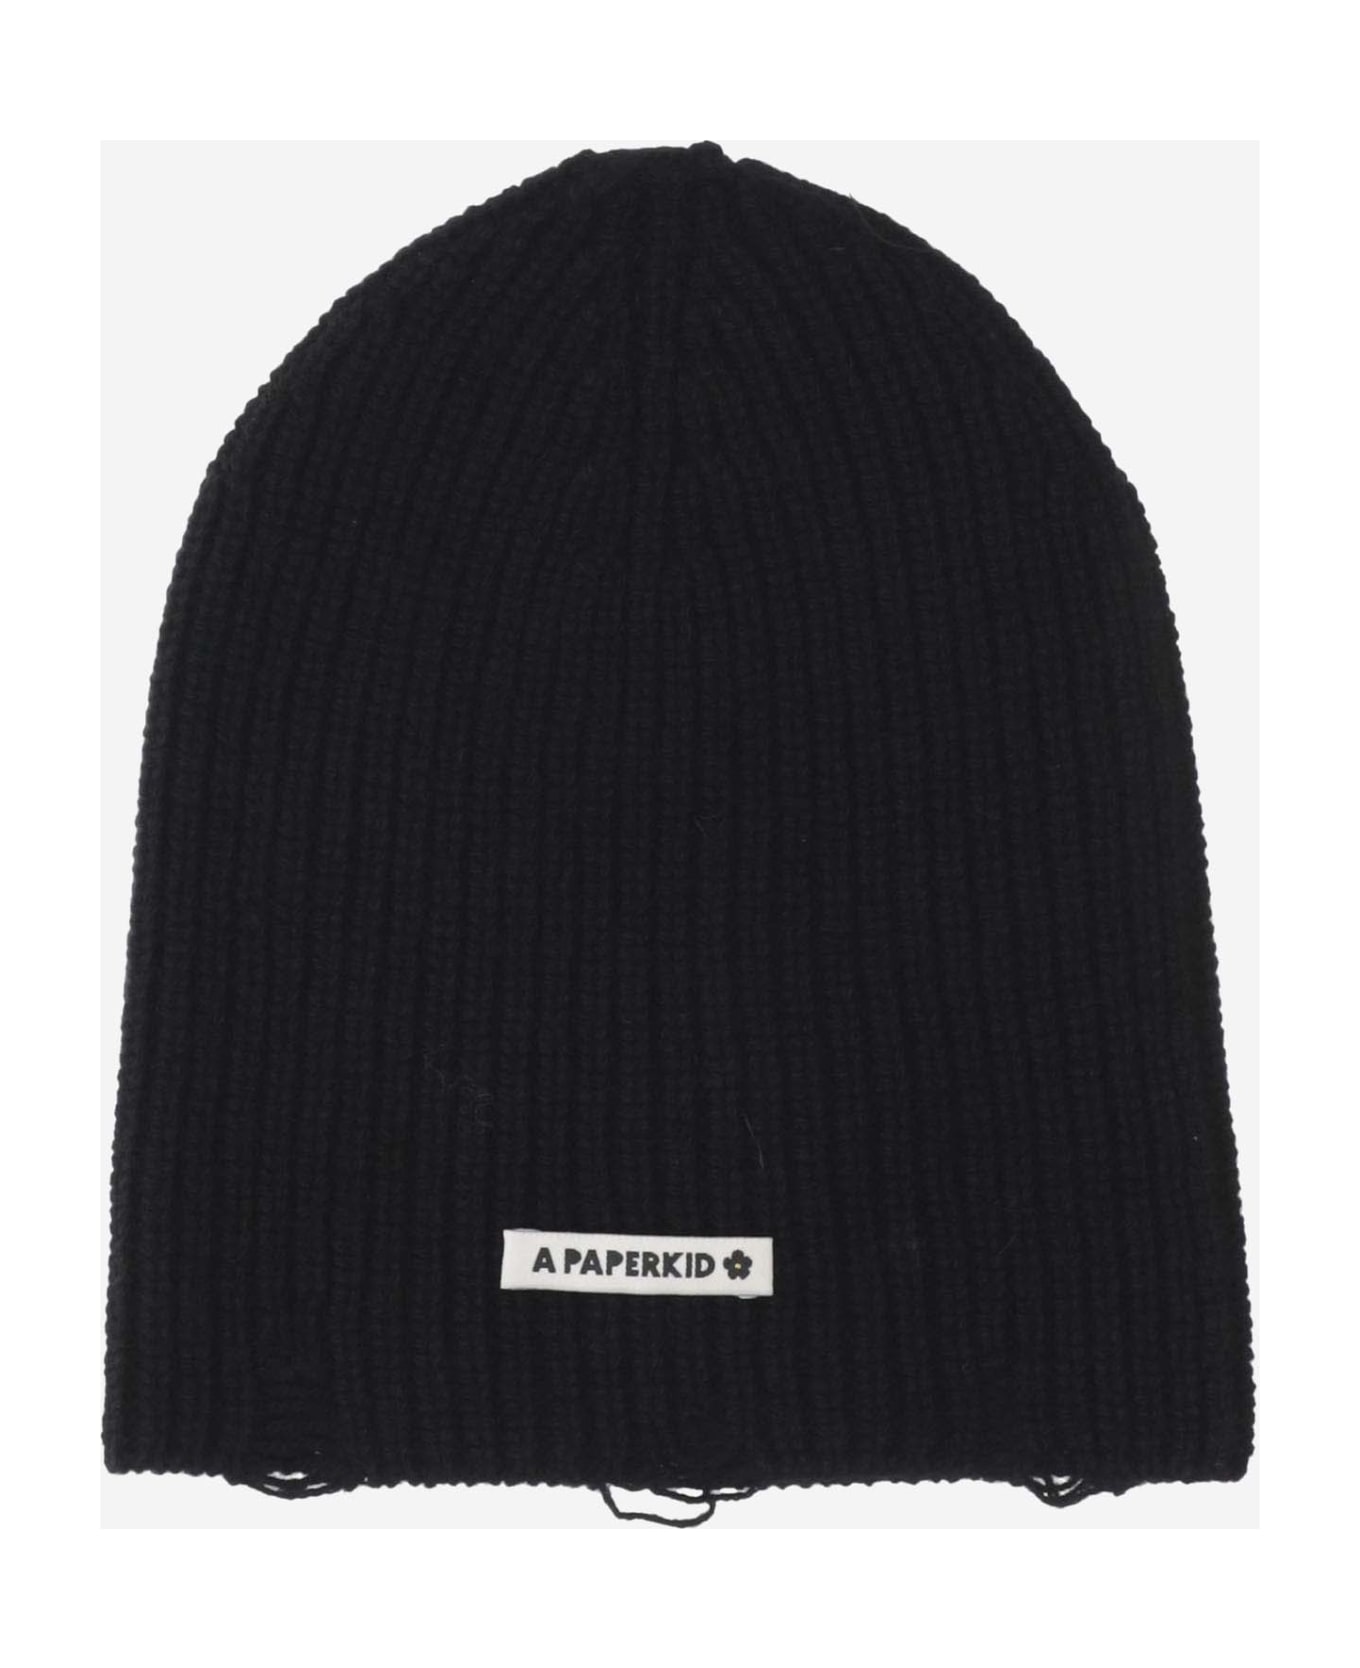 A Paper Kid Wool And Cashmere Beanie - Black